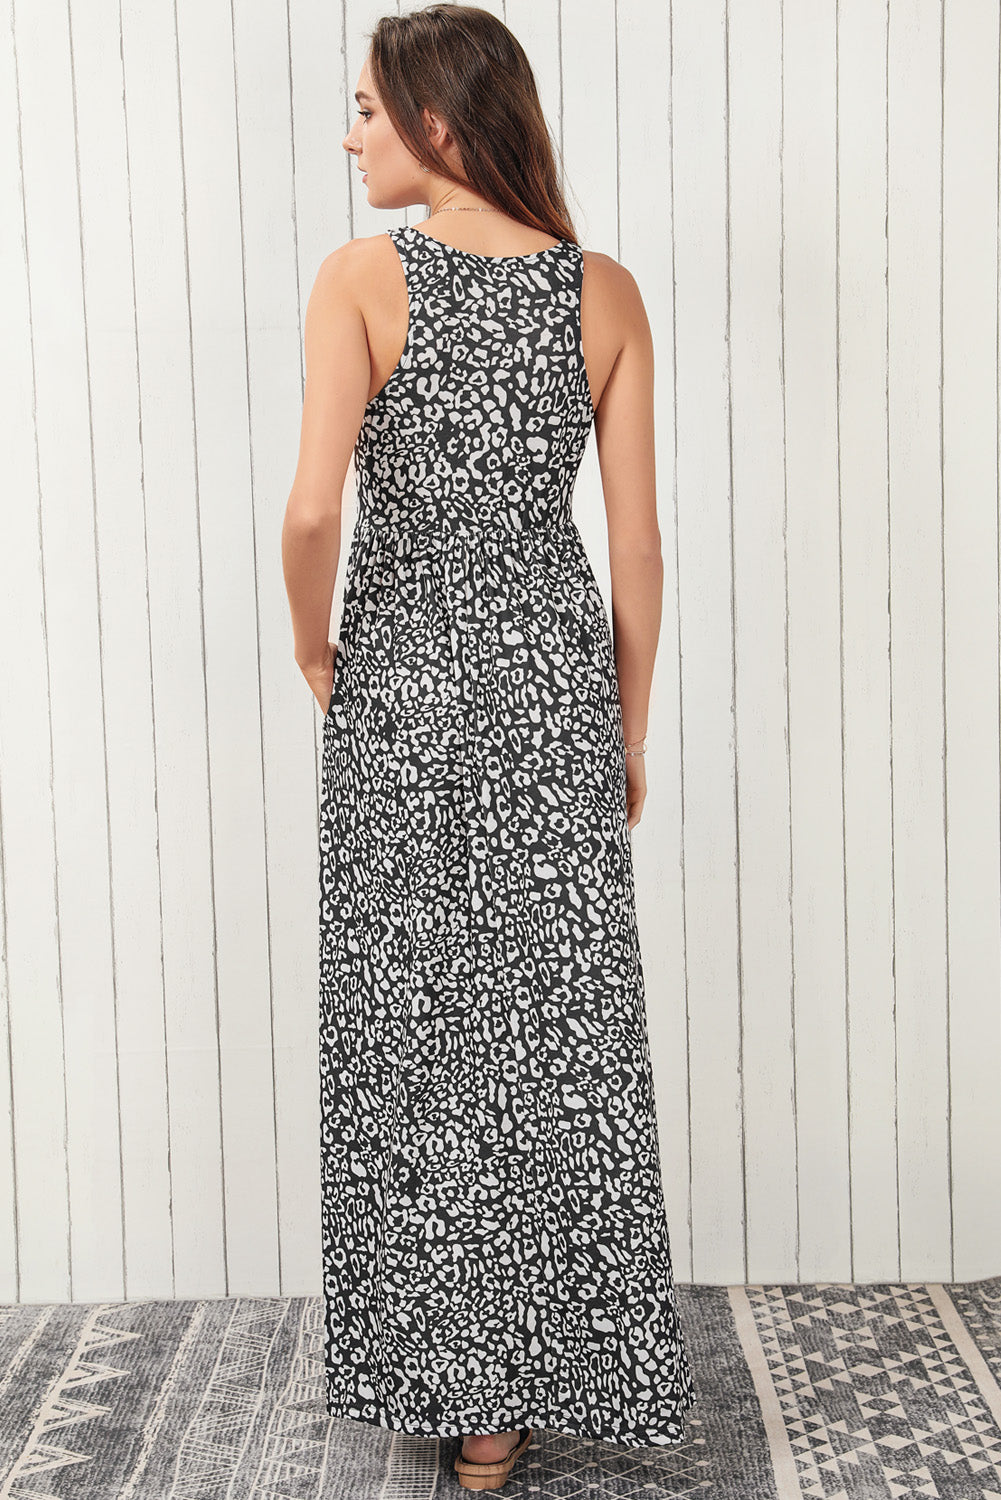 Sunday Stroll Leopard Maxi Dress - Cheeky Chic Boutique